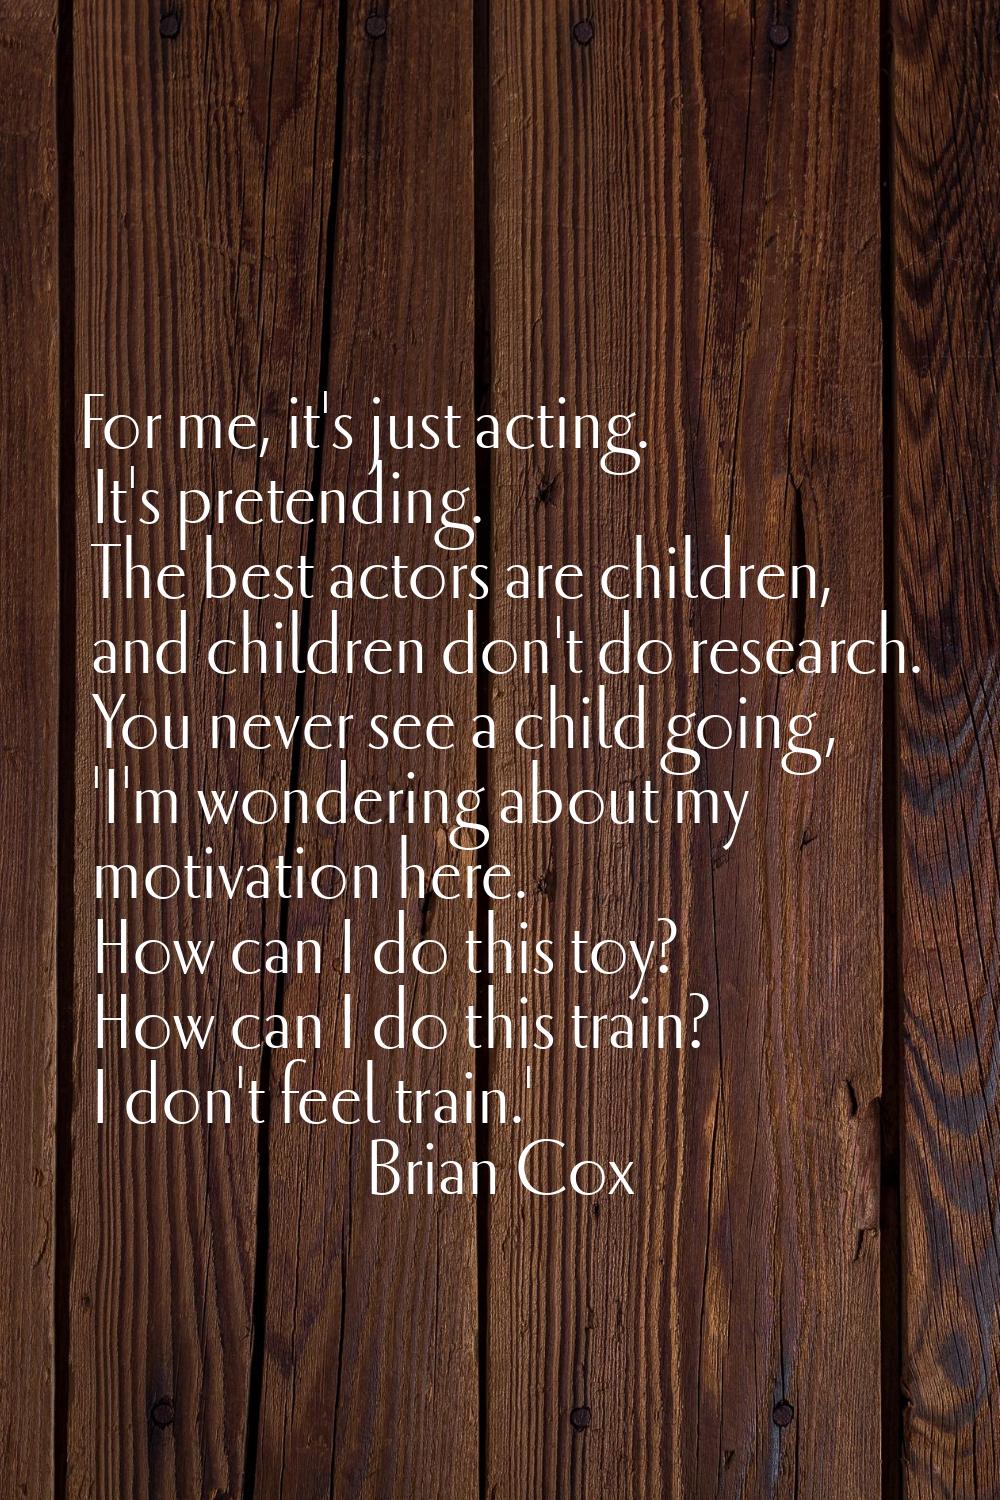 For me, it's just acting. It's pretending. The best actors are children, and children don't do rese